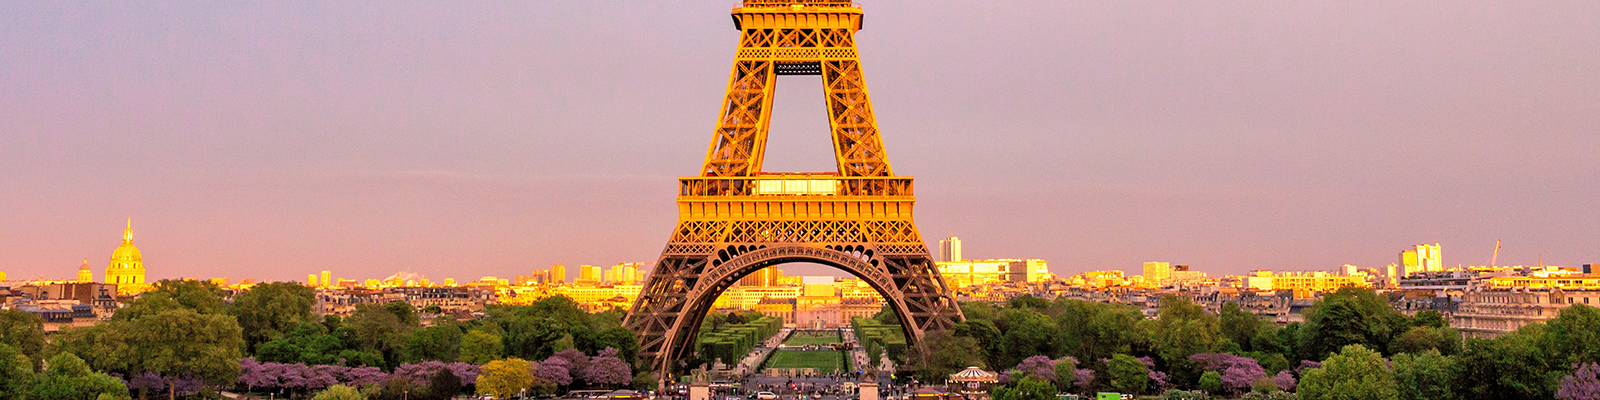 base of the eiffel tower during sunset with a pink sky background